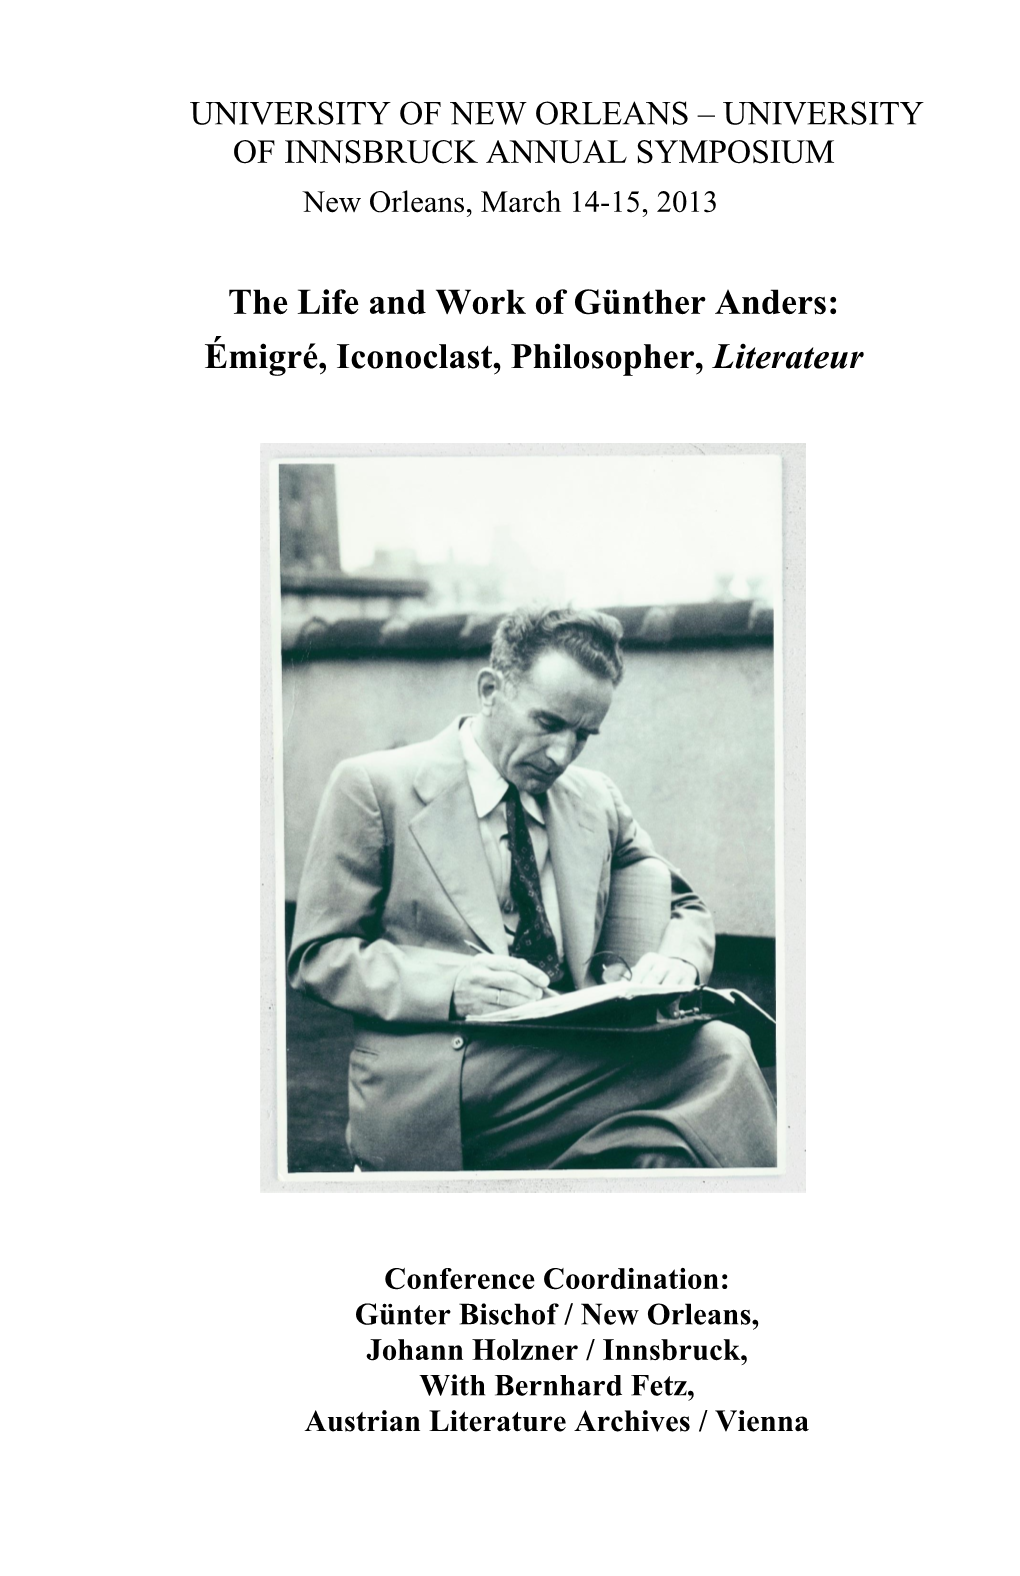 The Life and Work of Günther Anders: Émigré, Iconoclast, Philosopher, Literateur